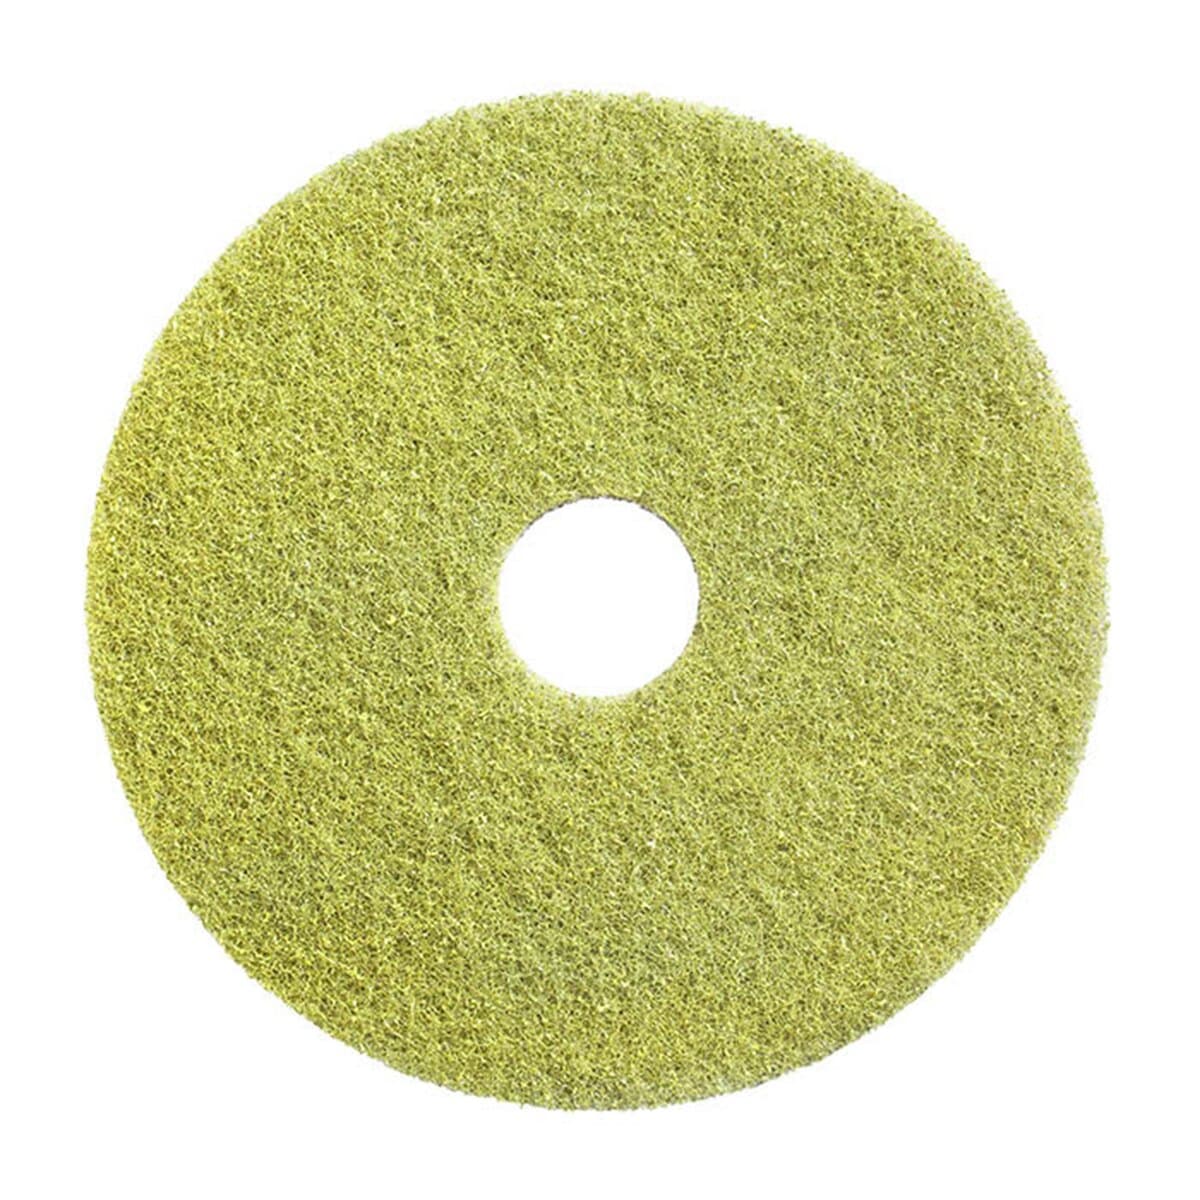 HTC Twister Pads - Yellow - Twister Cleaning Technology